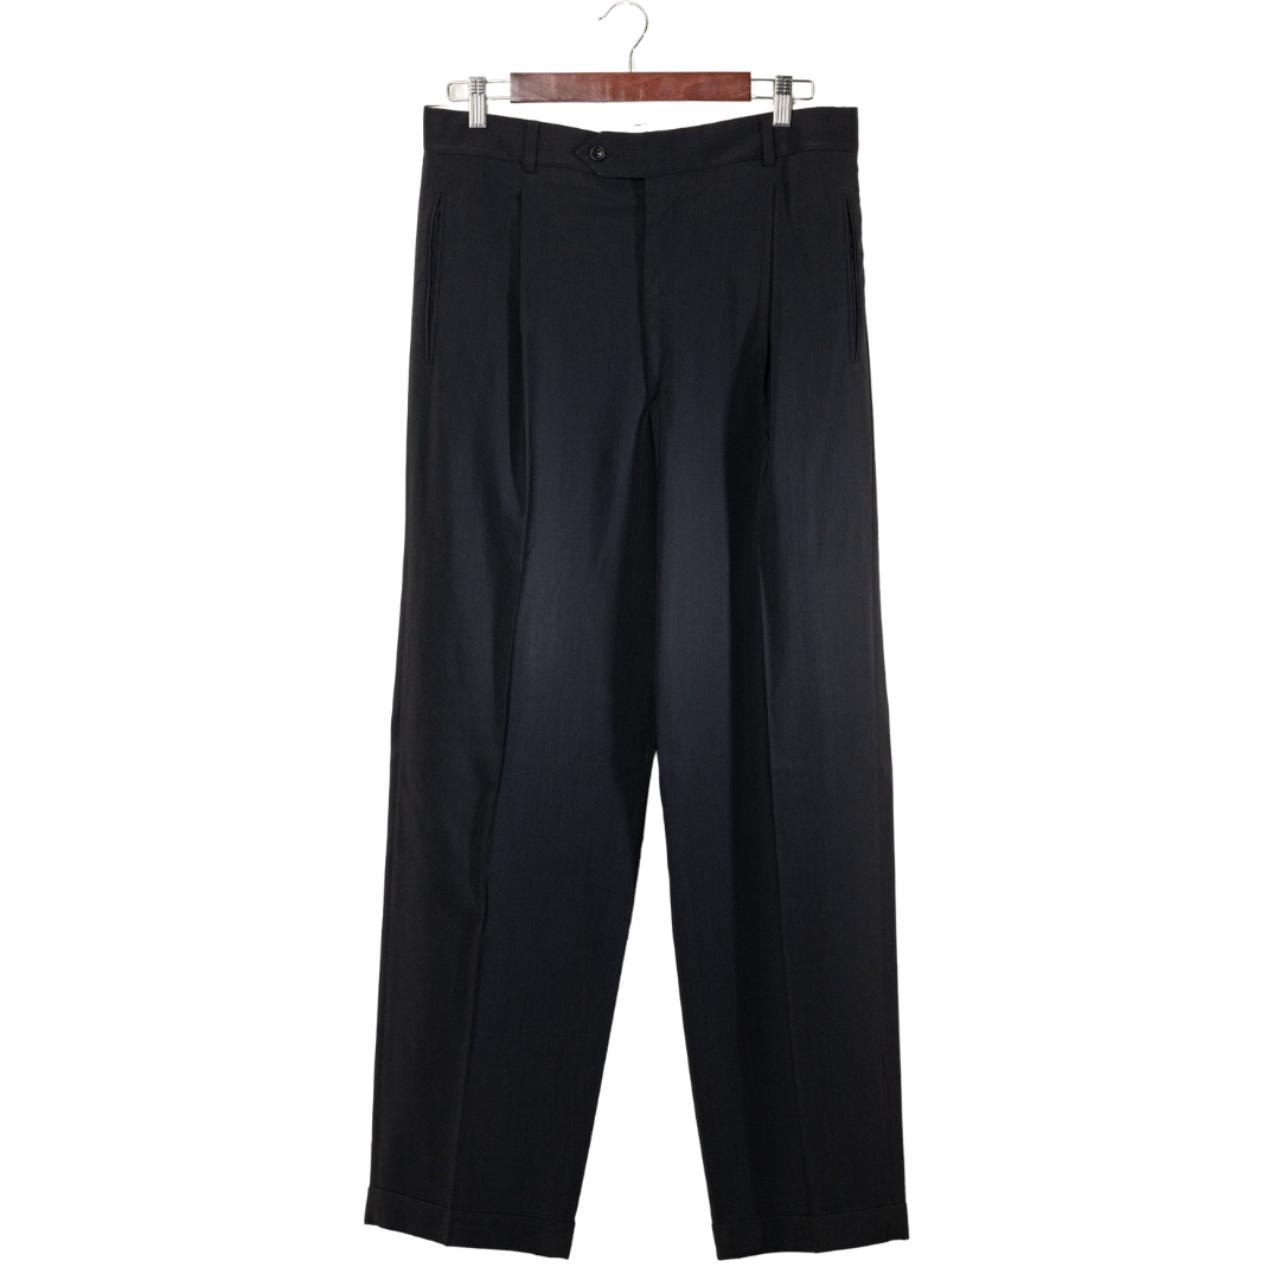 Armani Men's Black and Navy Trousers